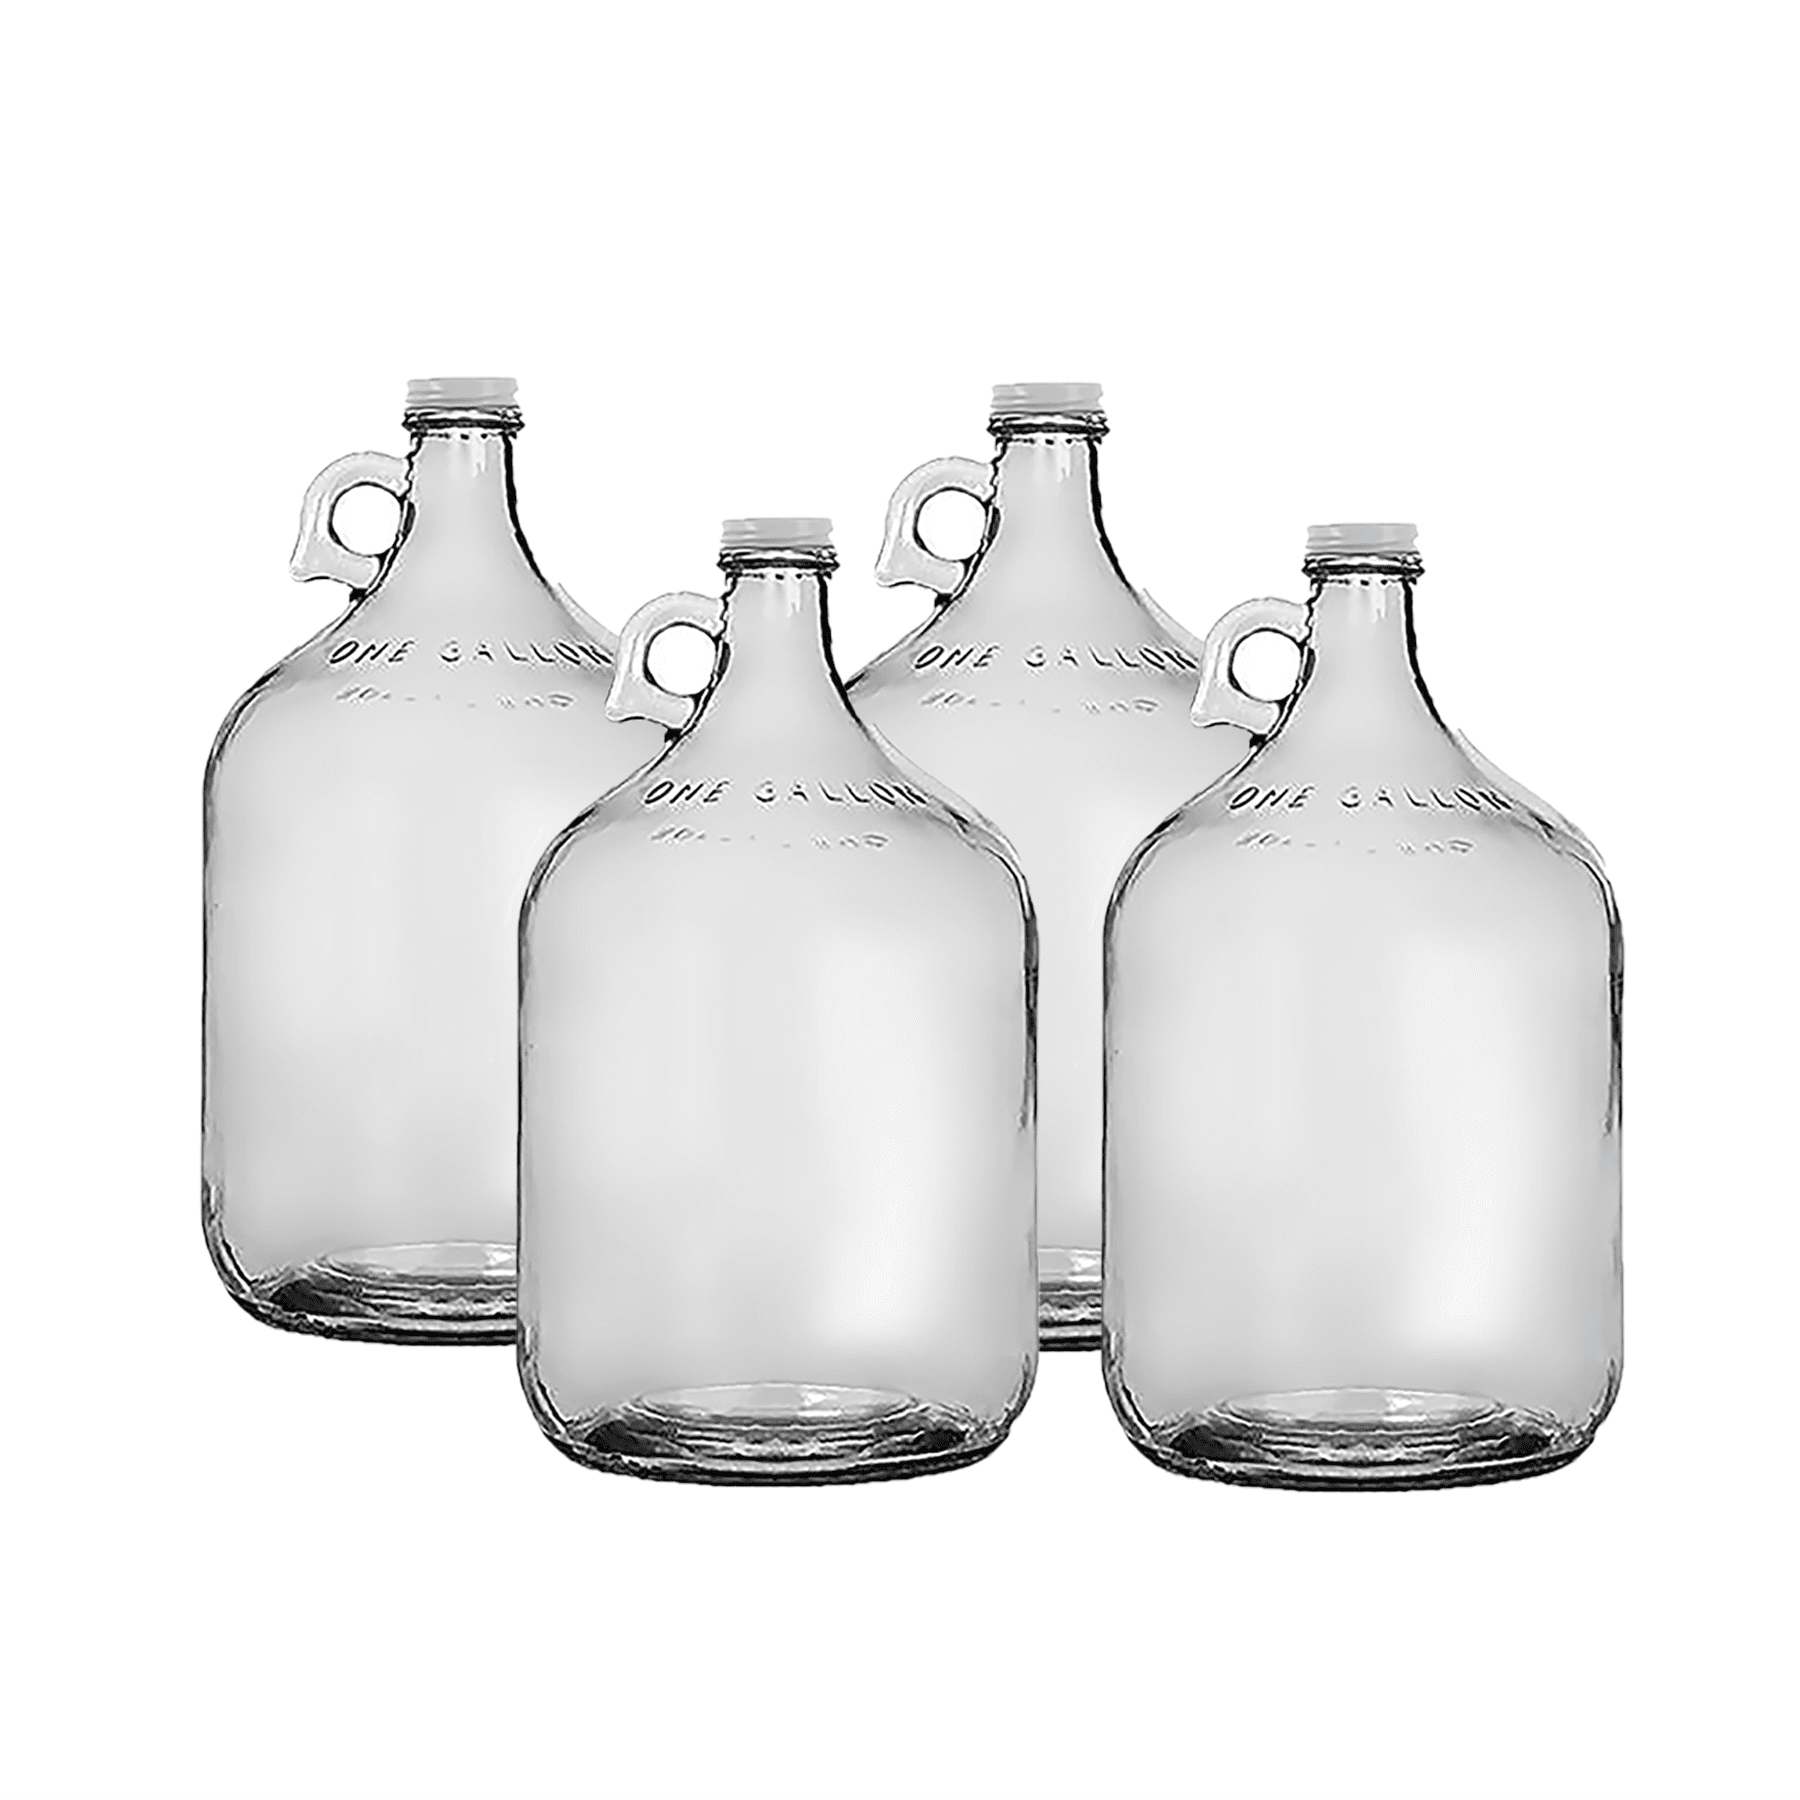 One Gallon Glass Jug with 38mm White Metal Screw Cap (Set of 8)